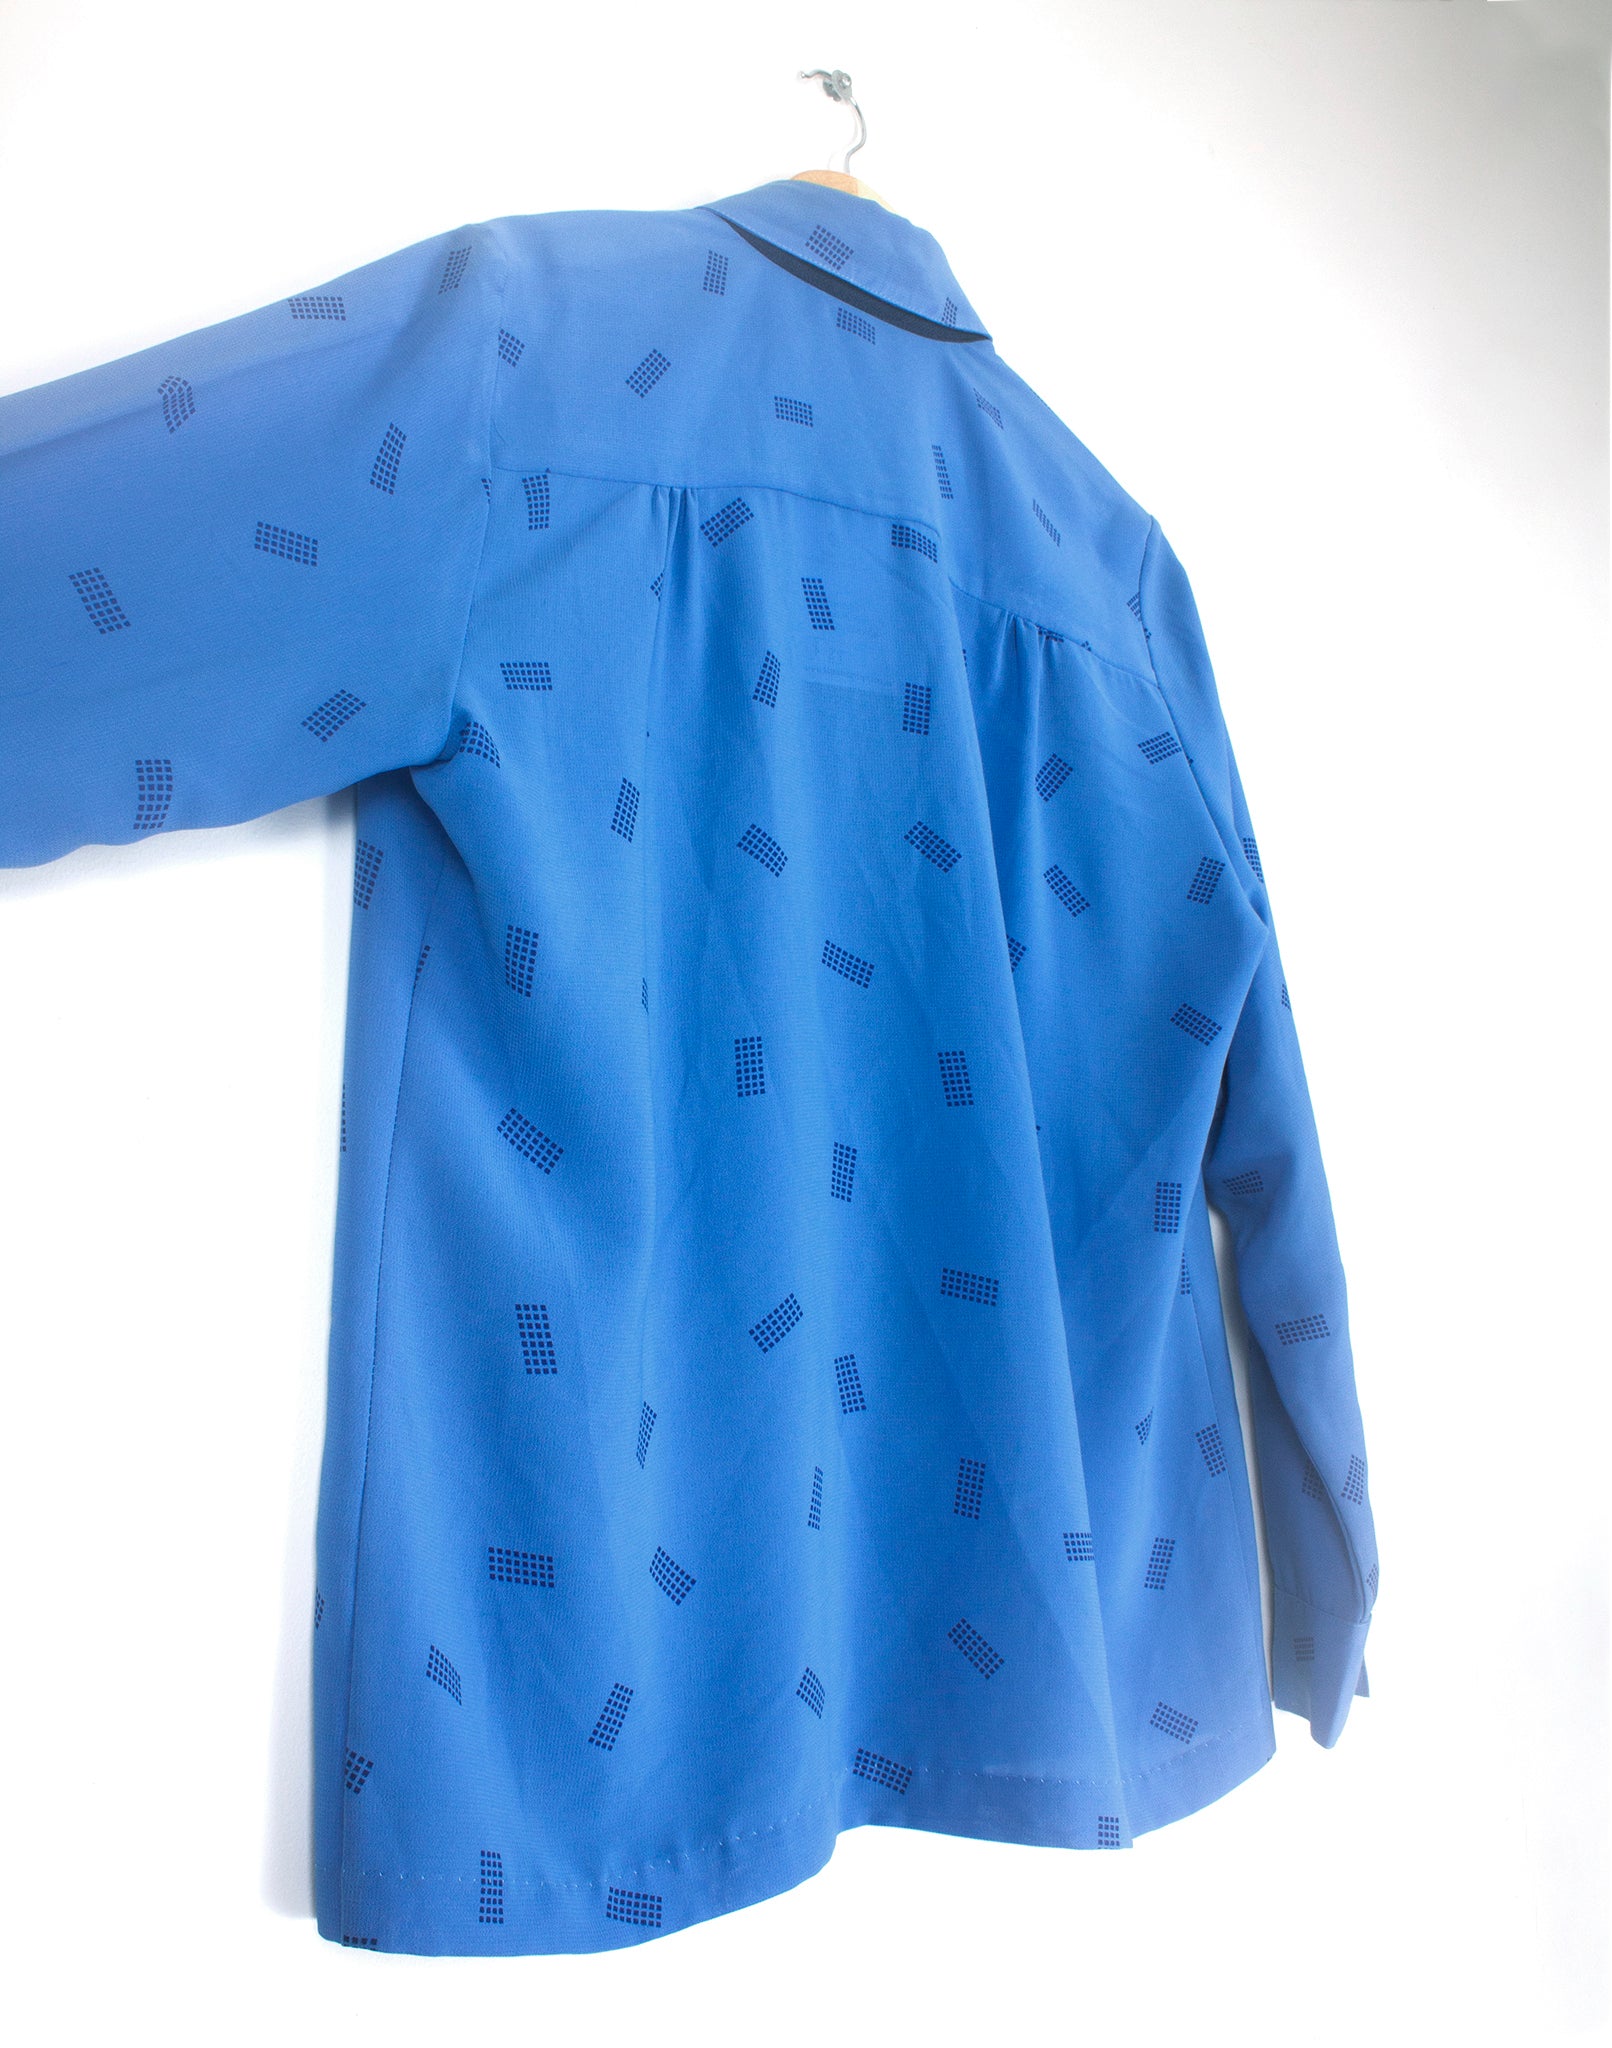 Vintage 80's Blue and Black Squiggle Long Sleeve Shirt - Size S